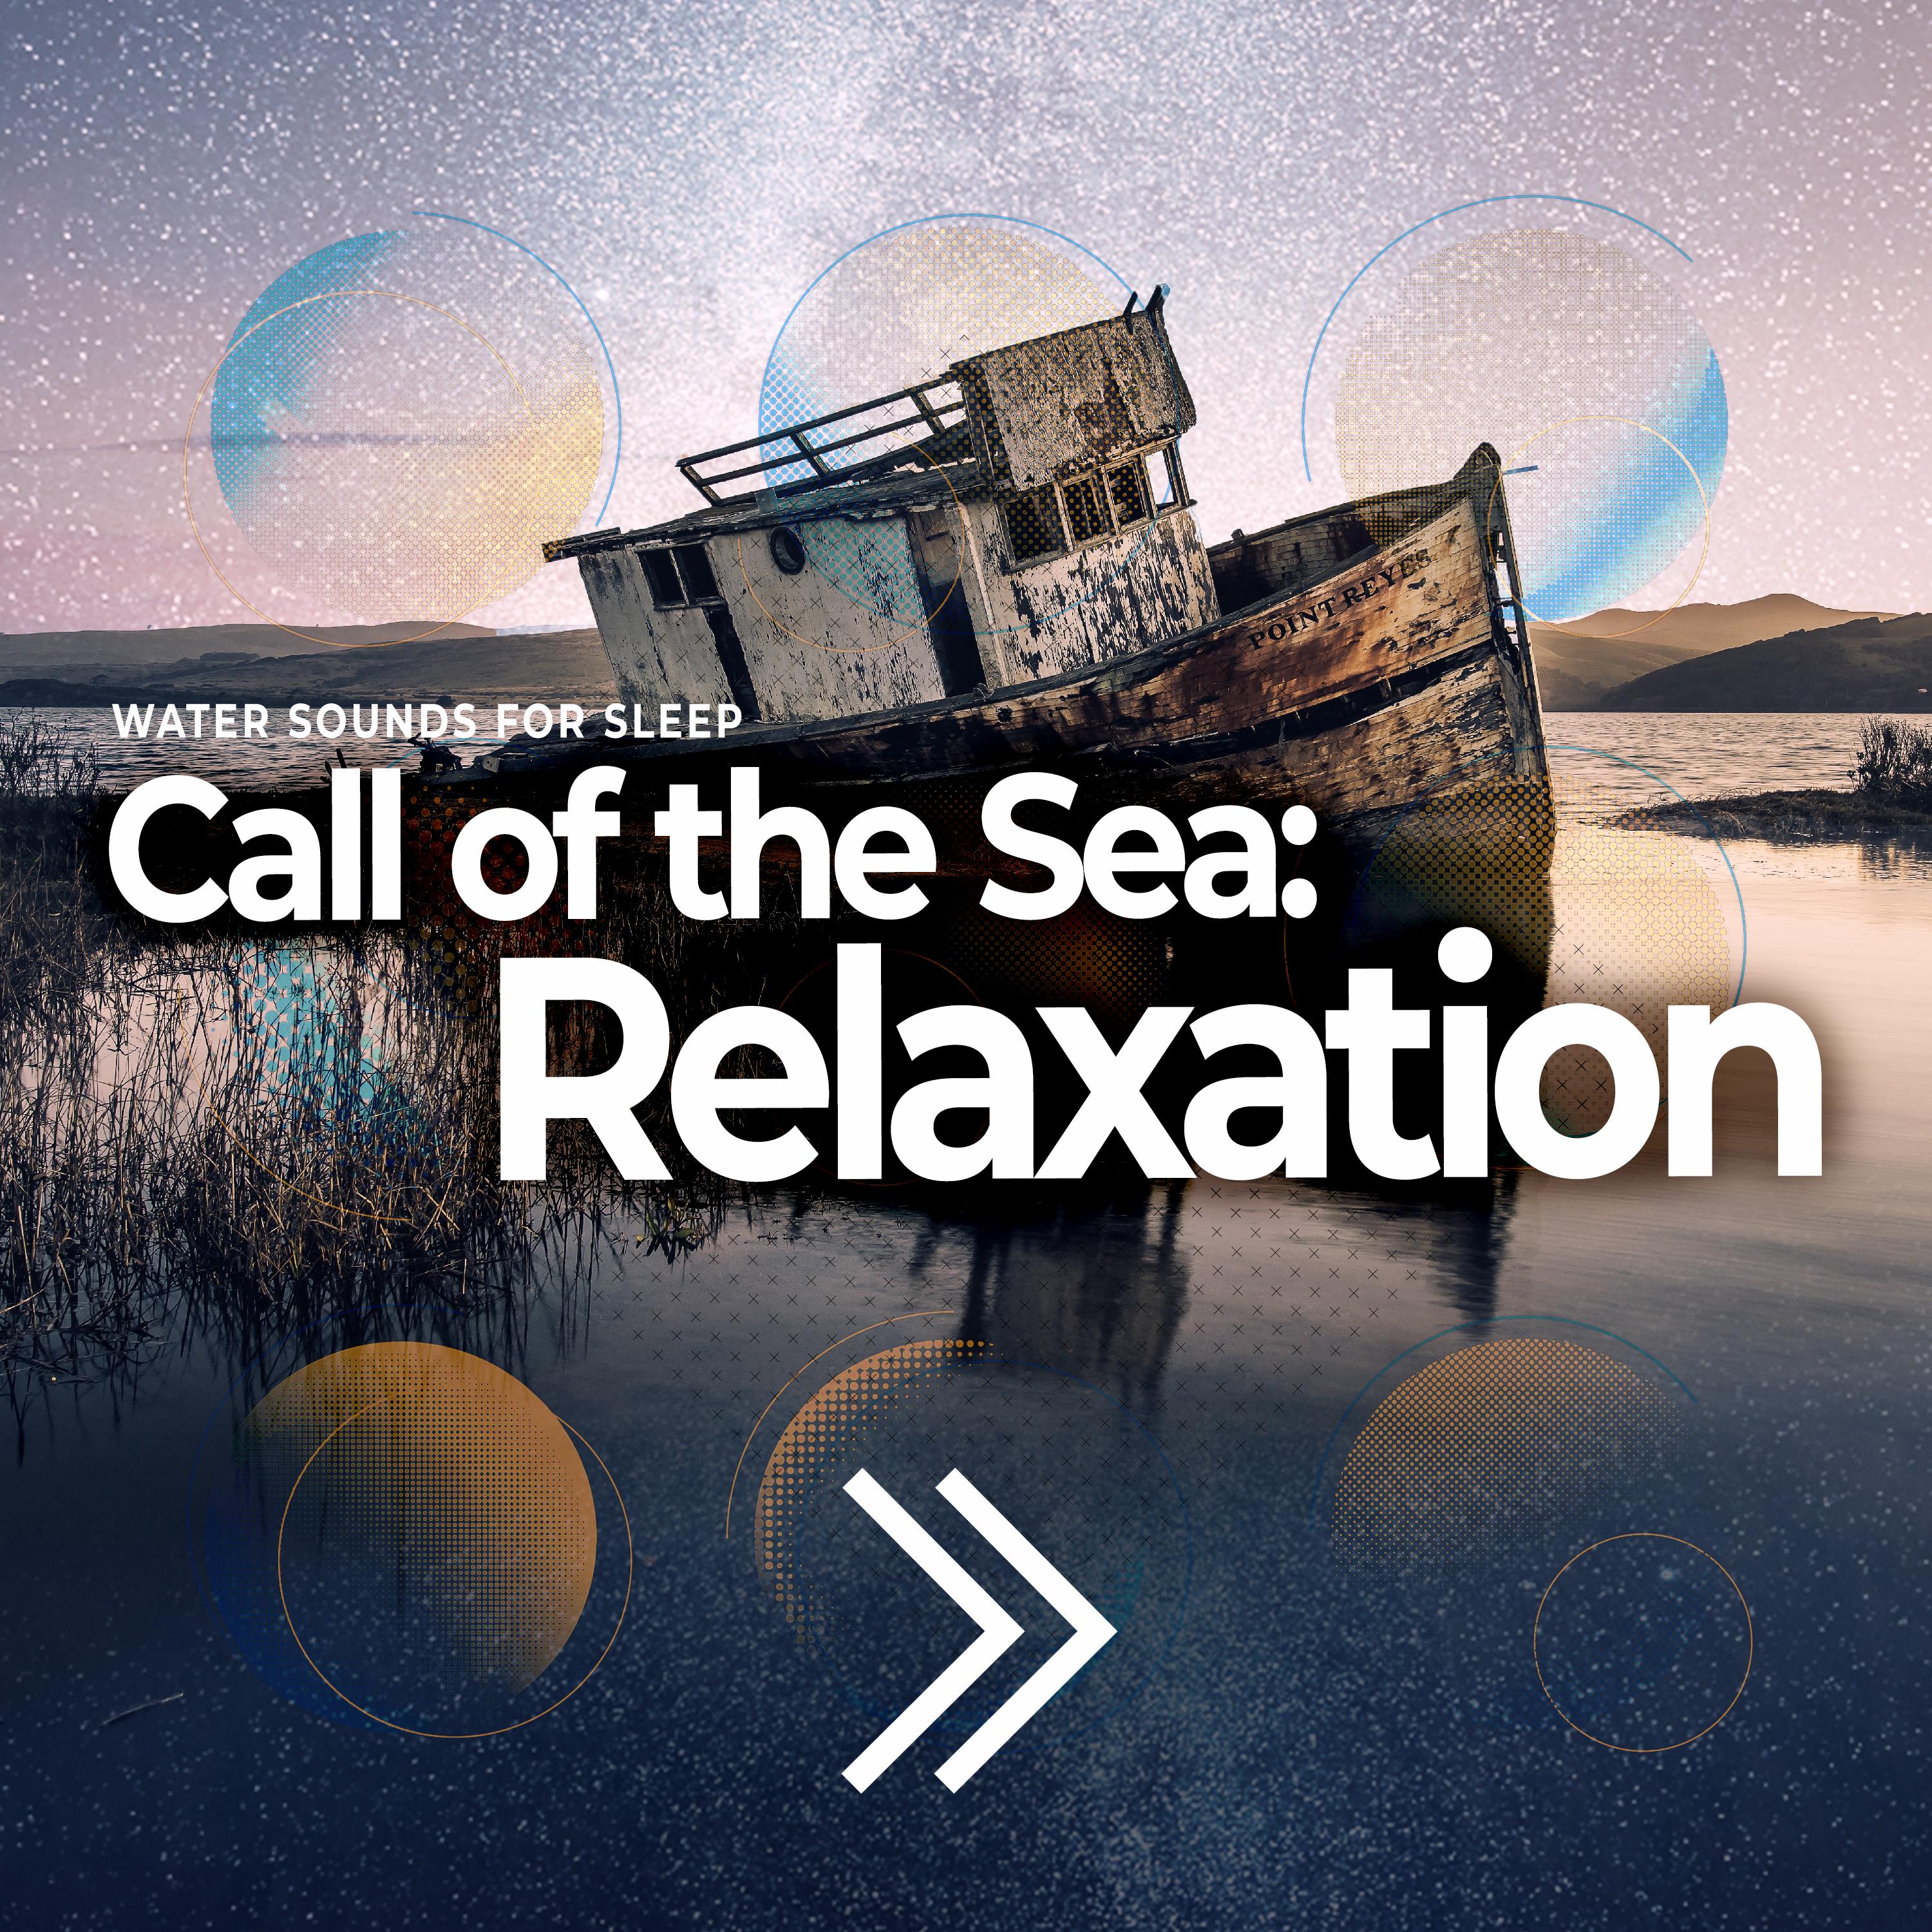 Call of the Sea: Relaxation